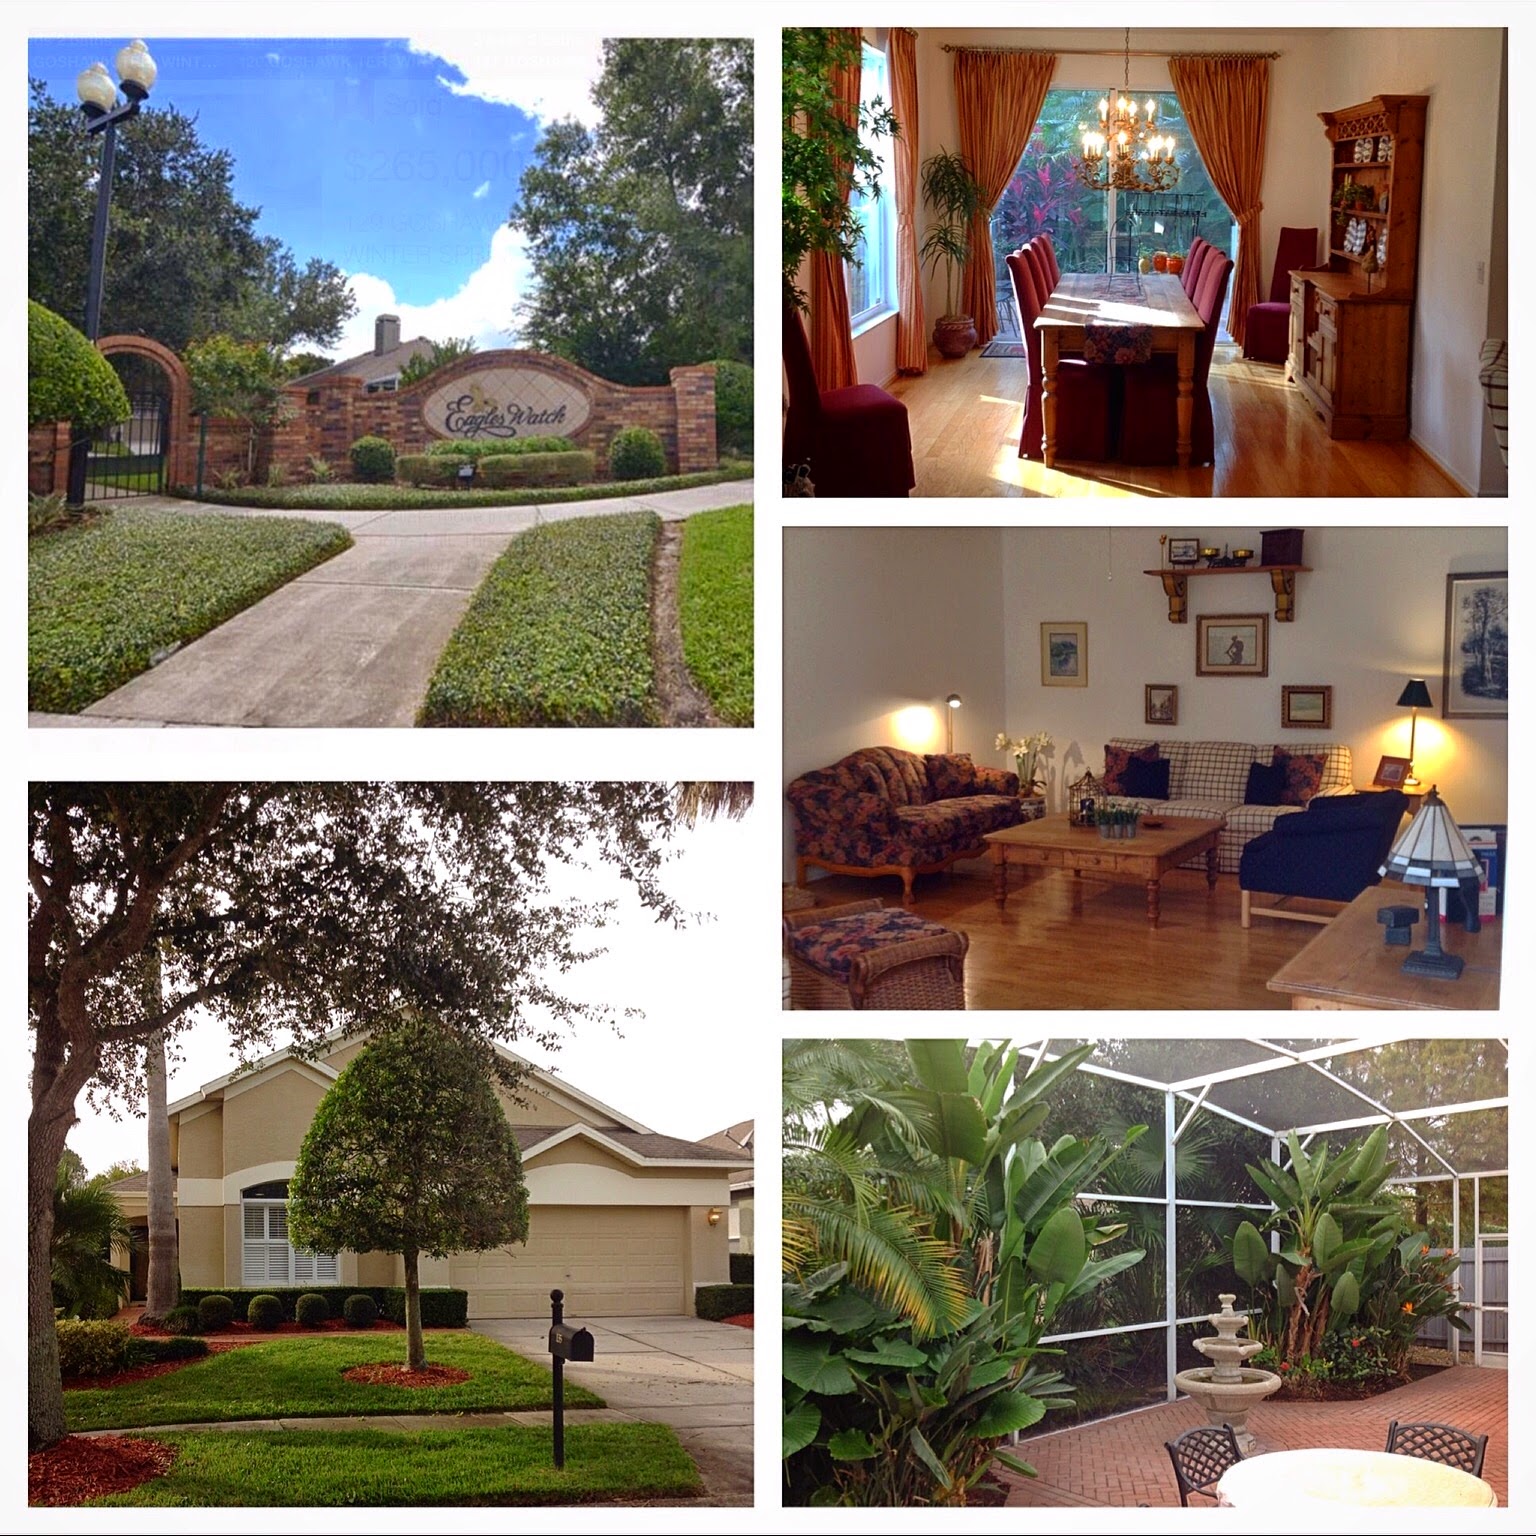 Winter Springs, FL Pending in a gated community with A+ schools!